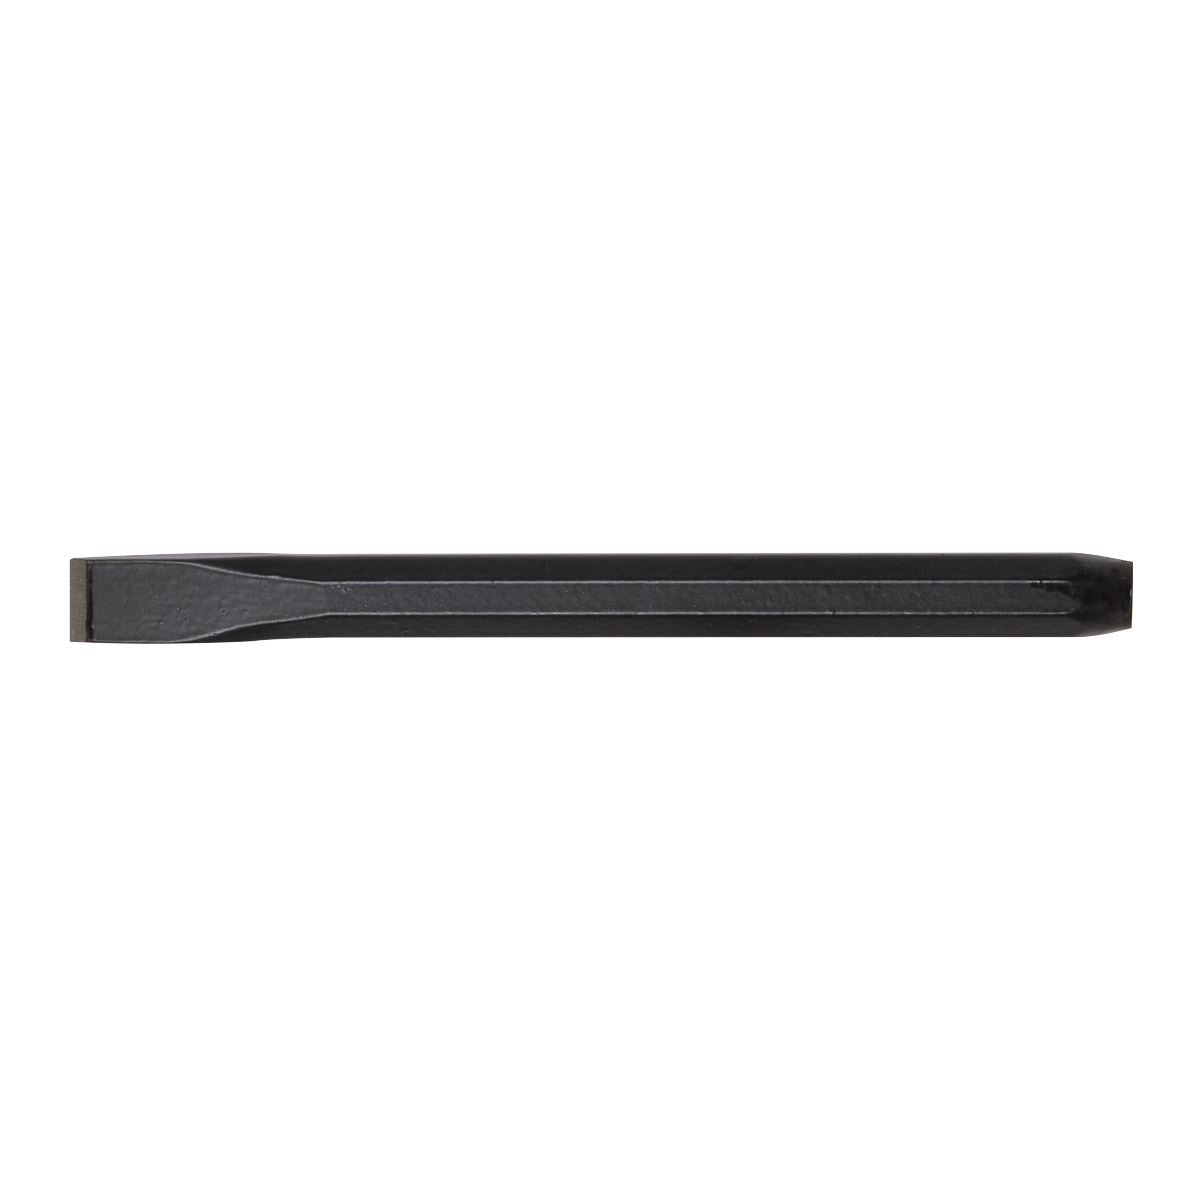 Sealey Cold Chisel 13 x 150mm